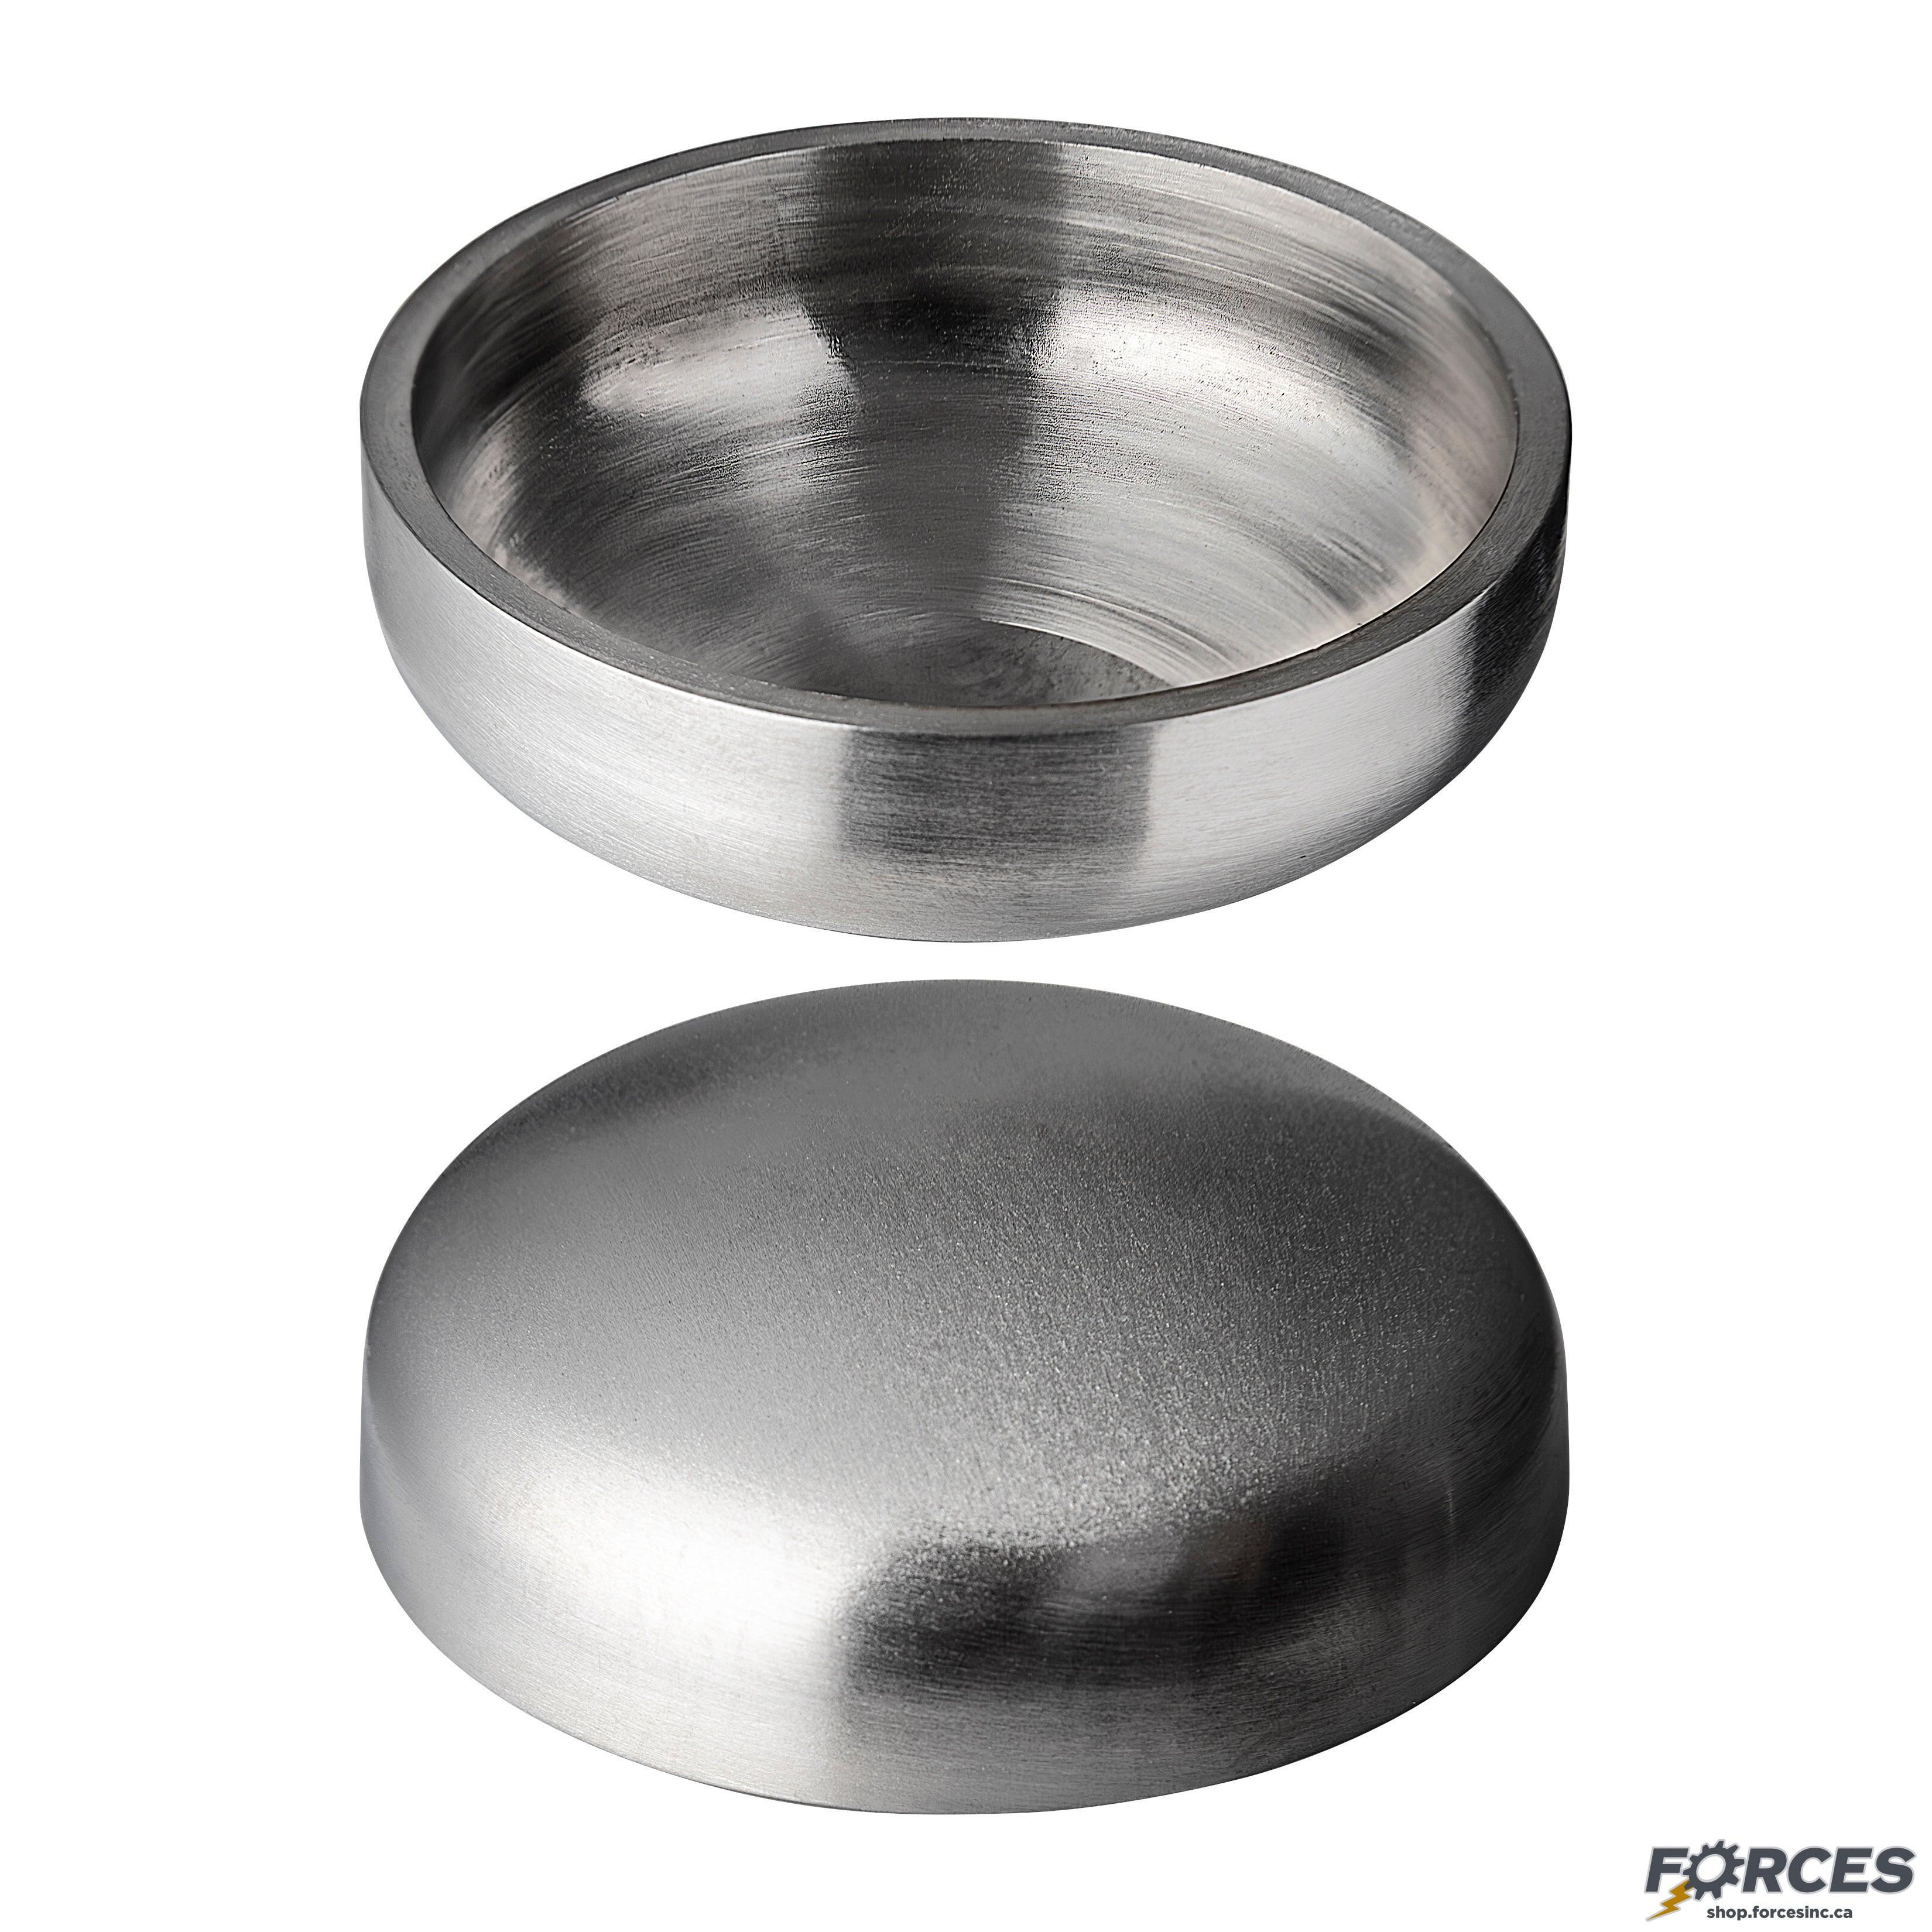 8" Butt Weld End Cap 16W - Stainless Steel 316 - Forces Inc